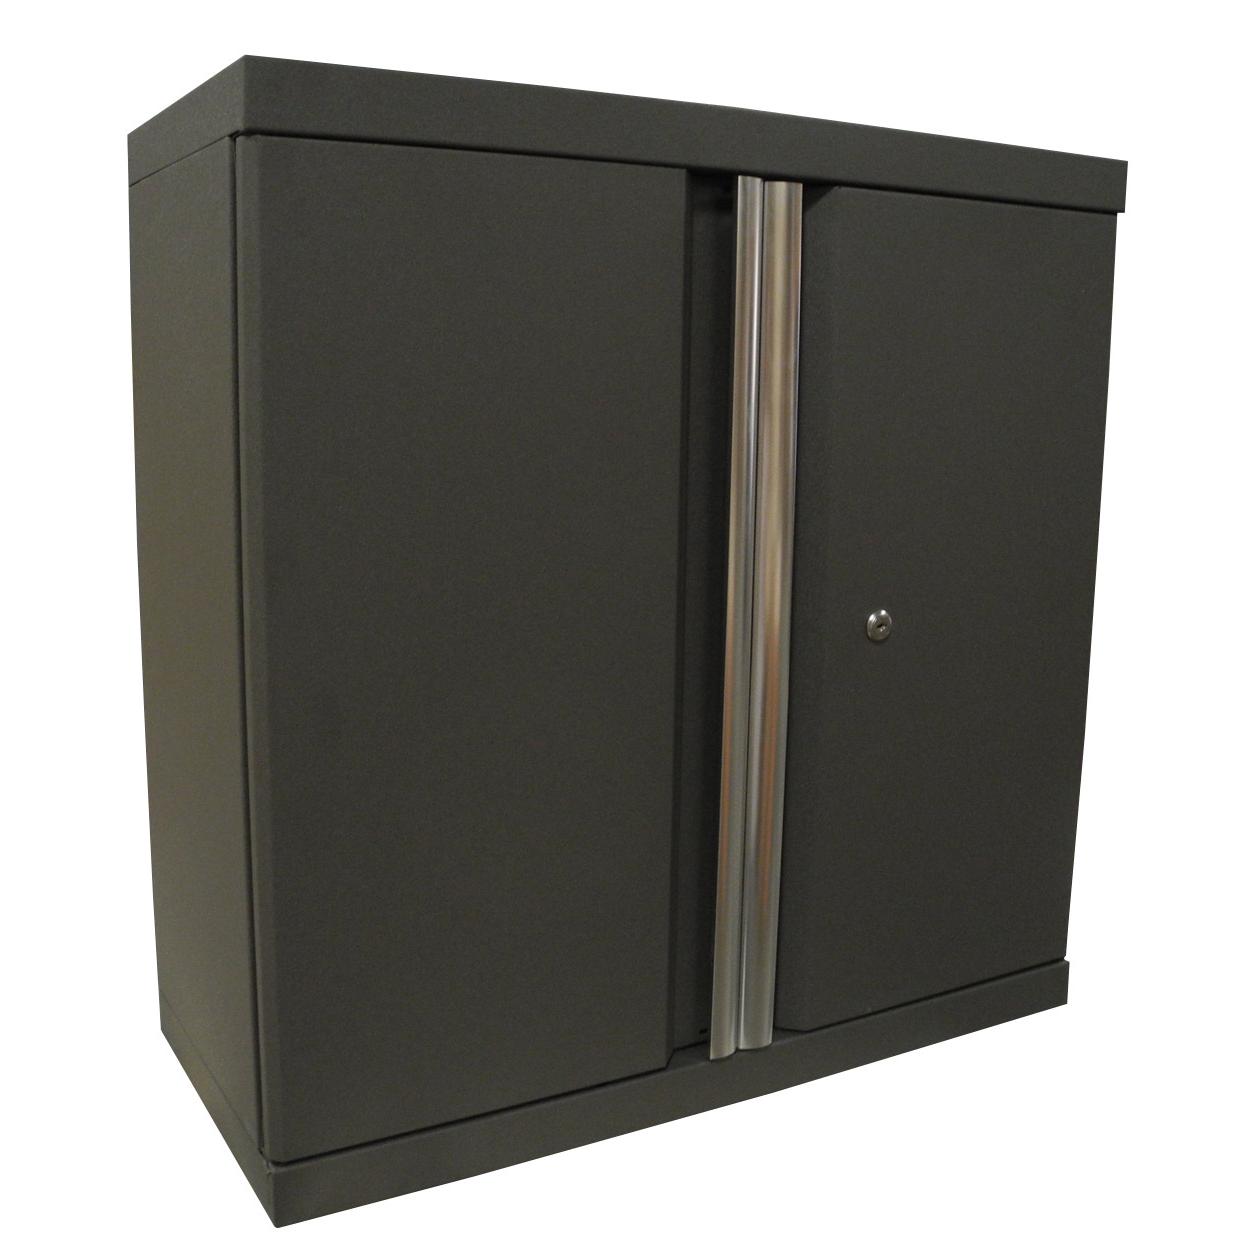 Redline 27 Overhead Storage Cabinet Clearance Free Shipping